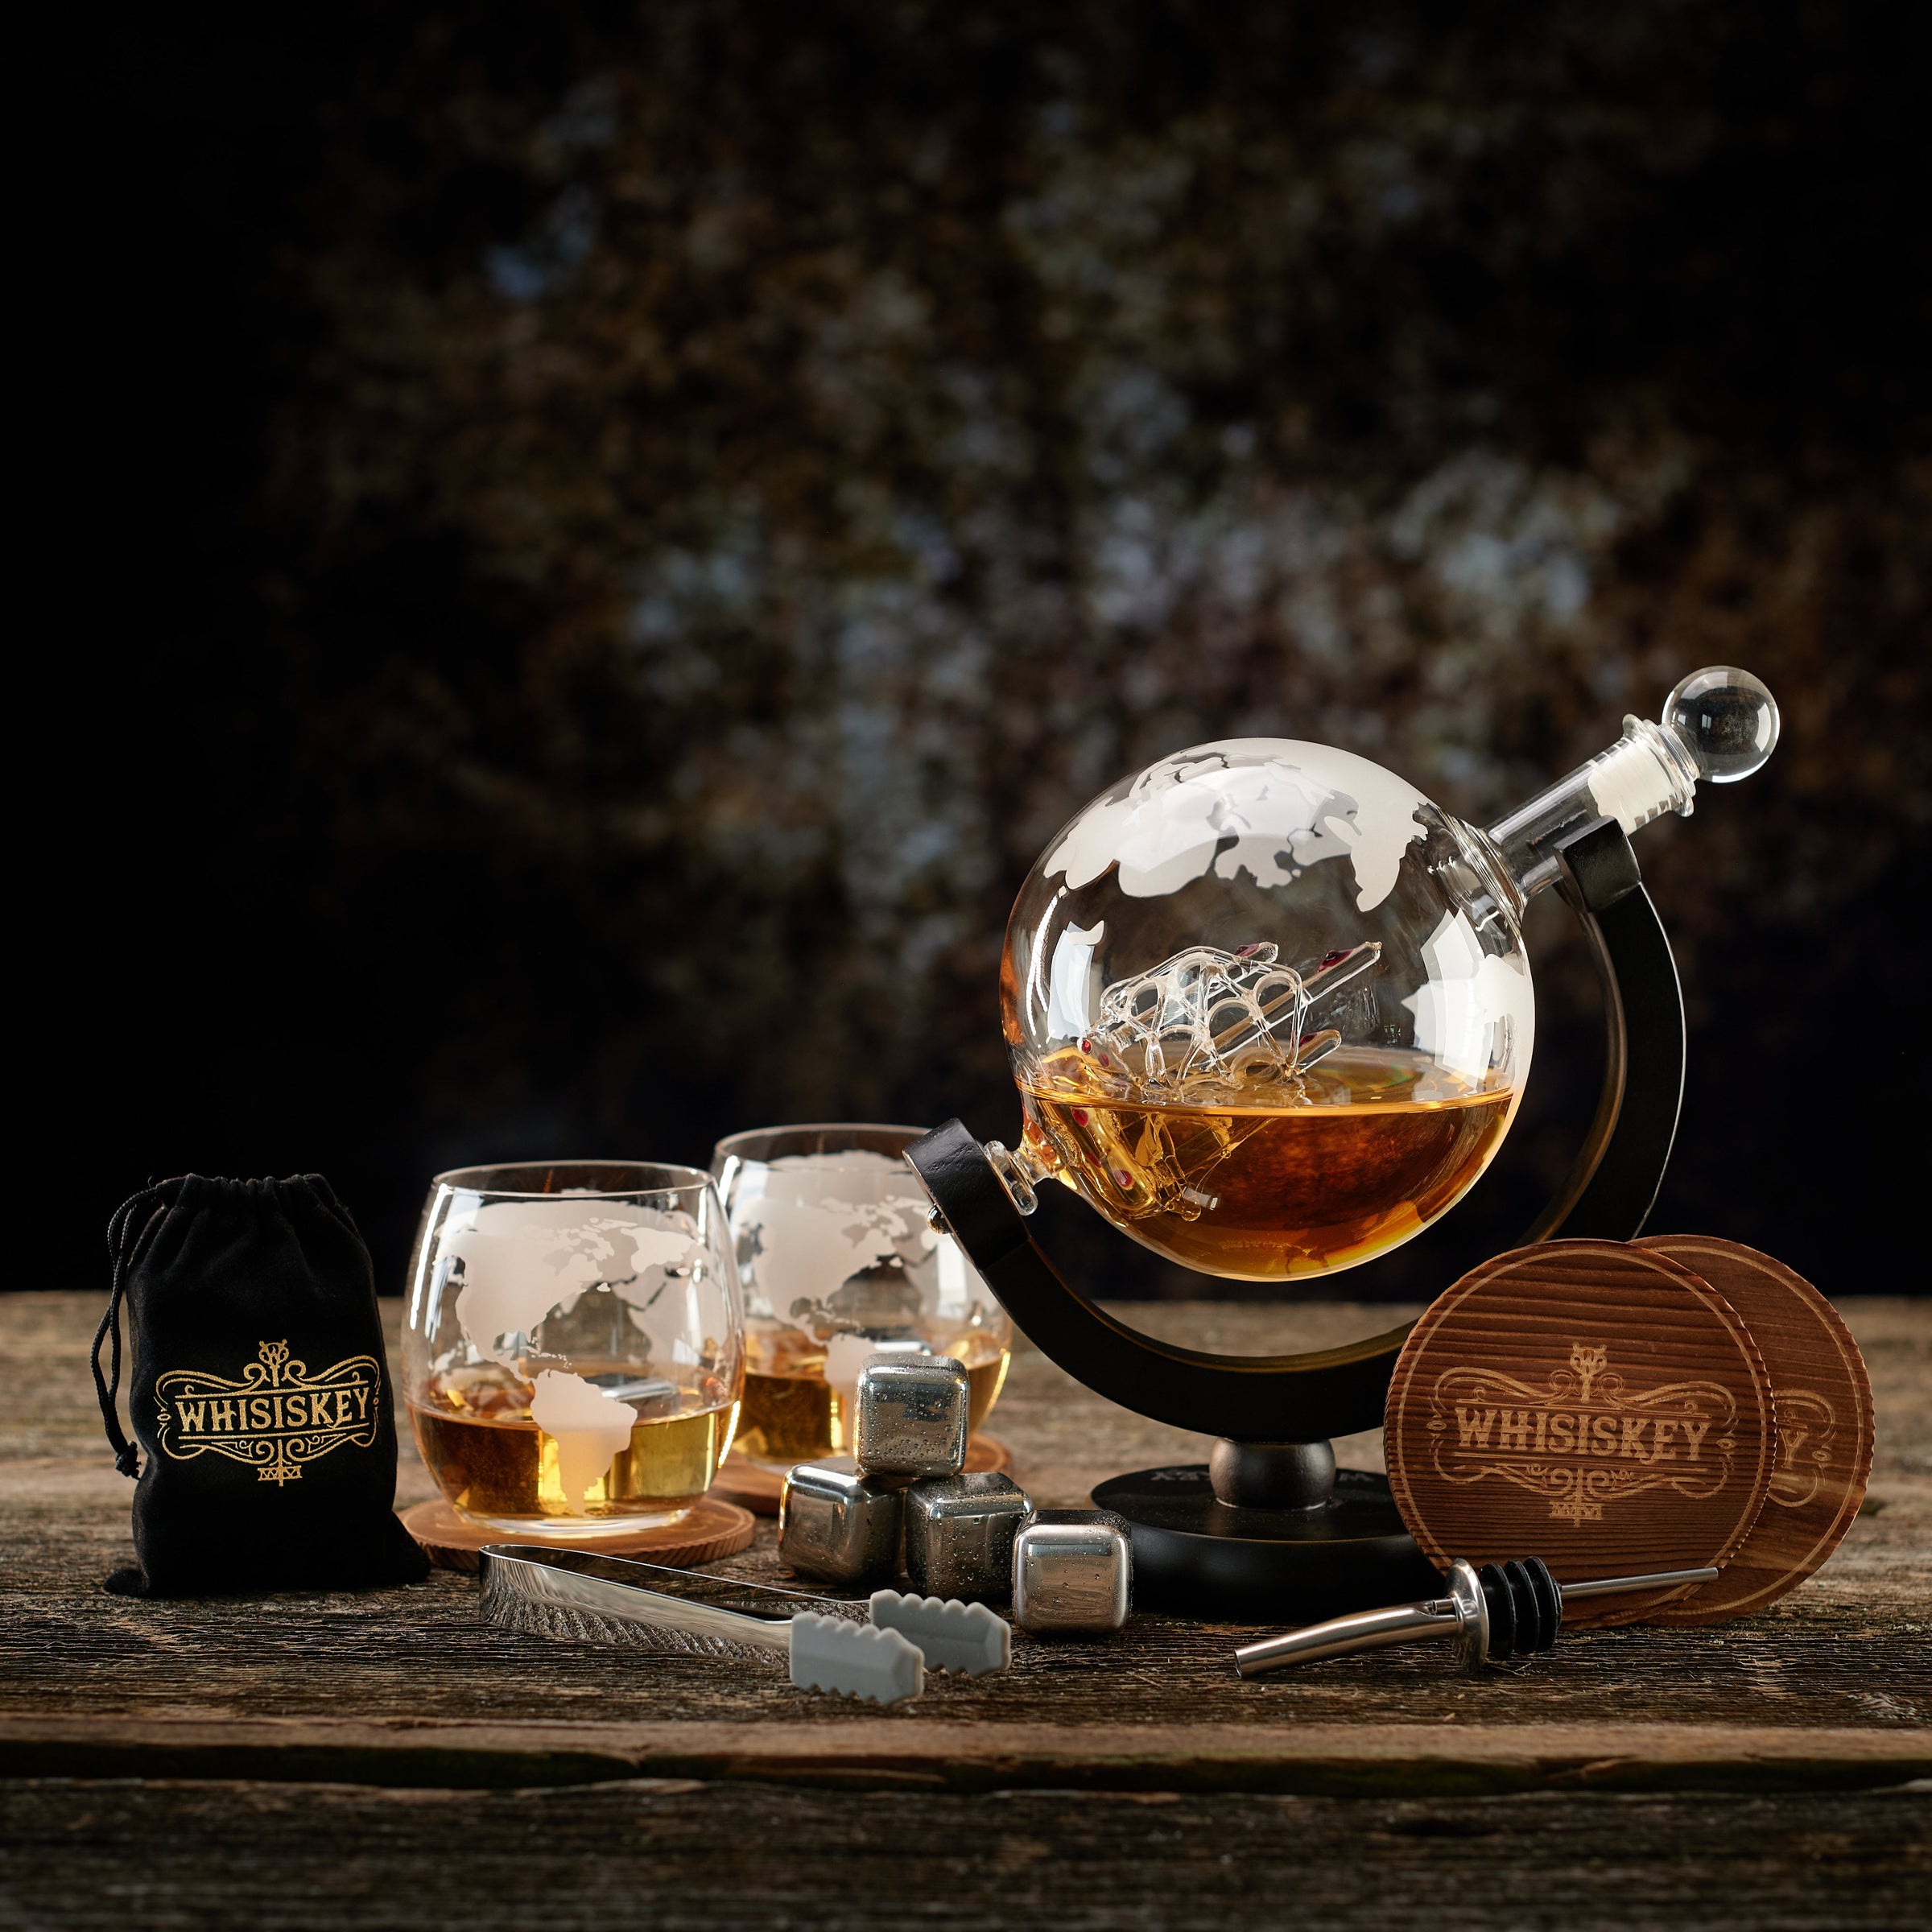 Whiskey Decanters Whisiskey